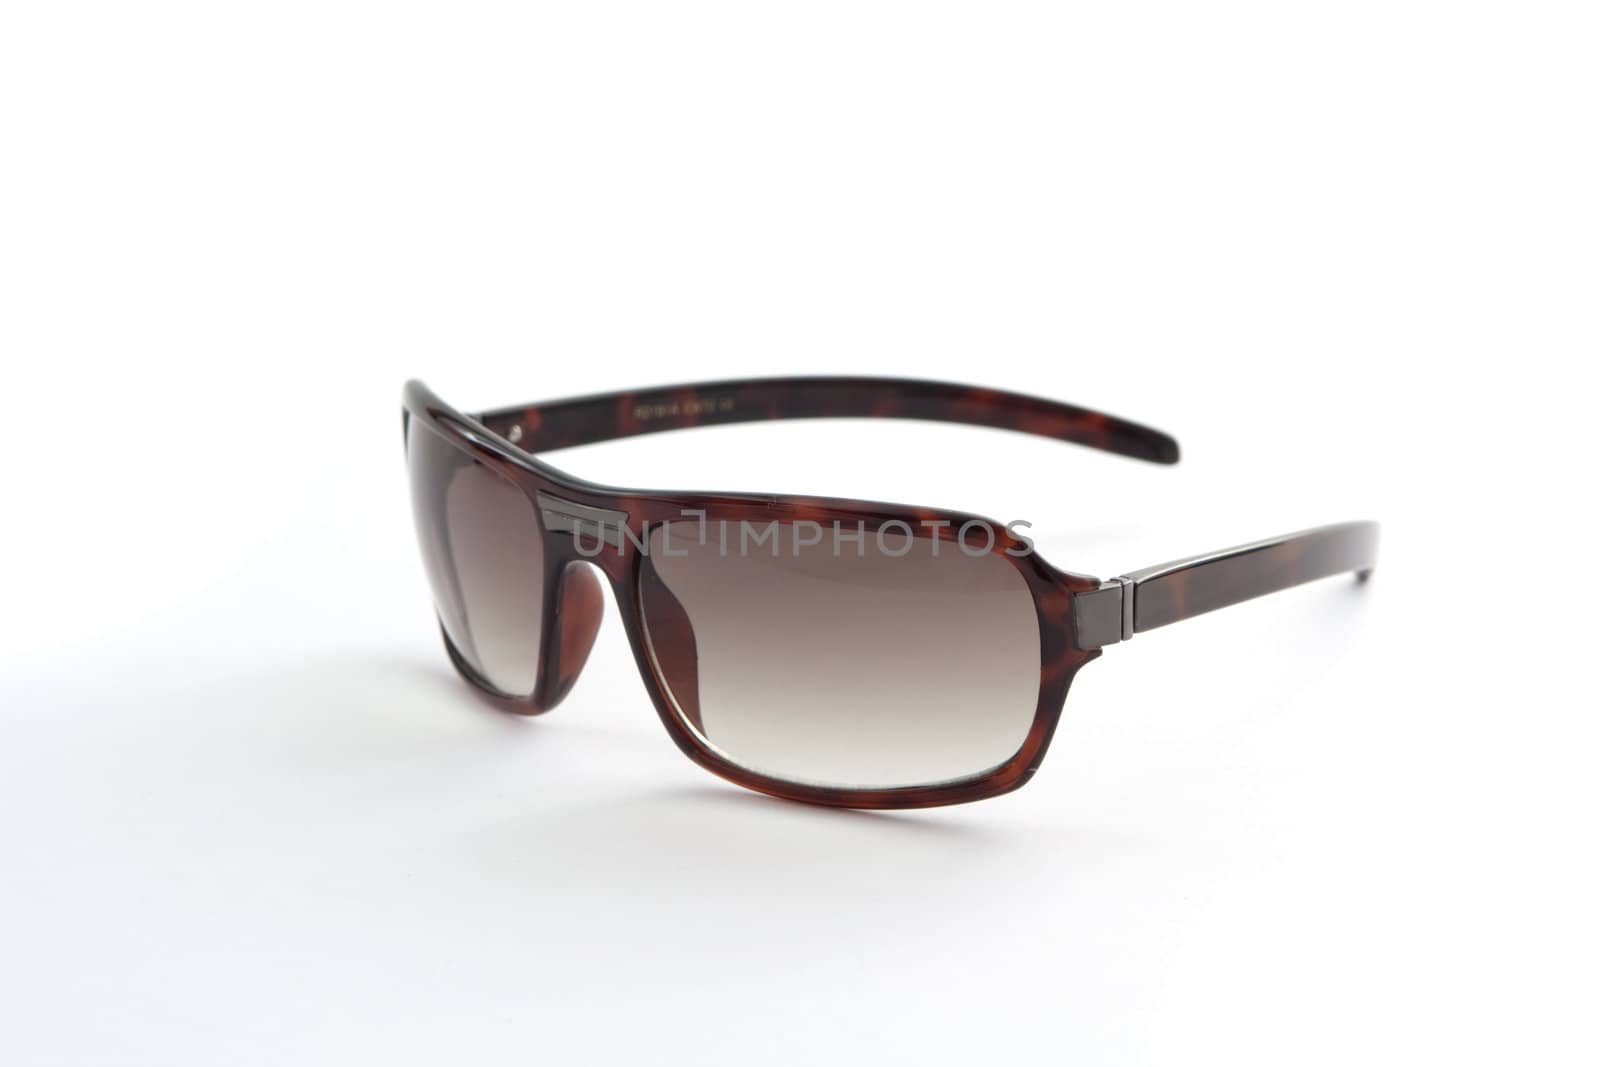 Women's brown sunglasses on a white background